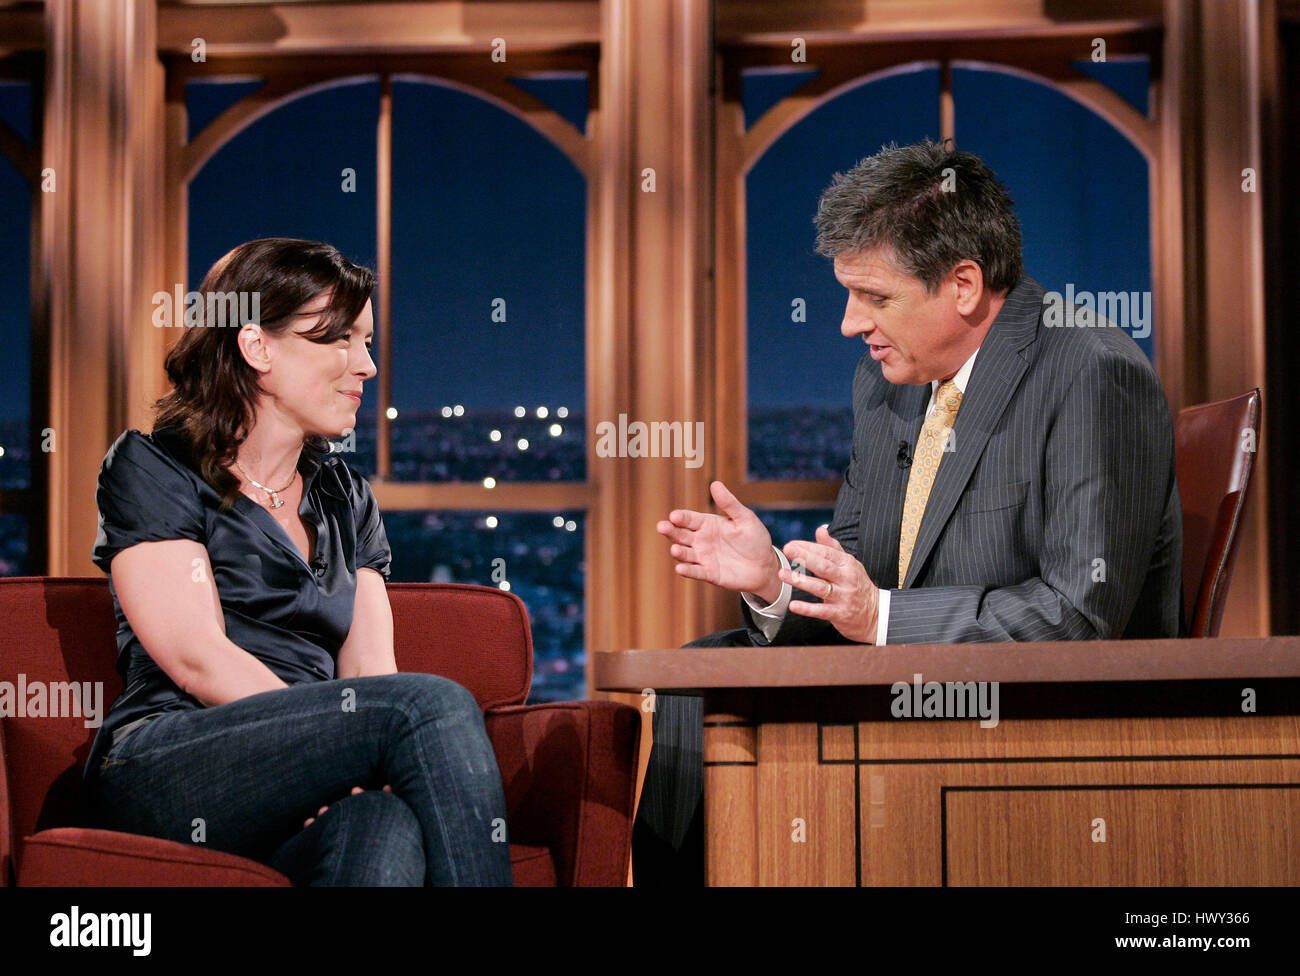 Actress Olivia Williams, left, chats with host Craig Ferguson during a segment of 'The Late Late Show with Craig Ferguson' at CBS Television City in Los Angeles, California, on Jan. 20, 2009. Photo by Francis Specker Stock Photo